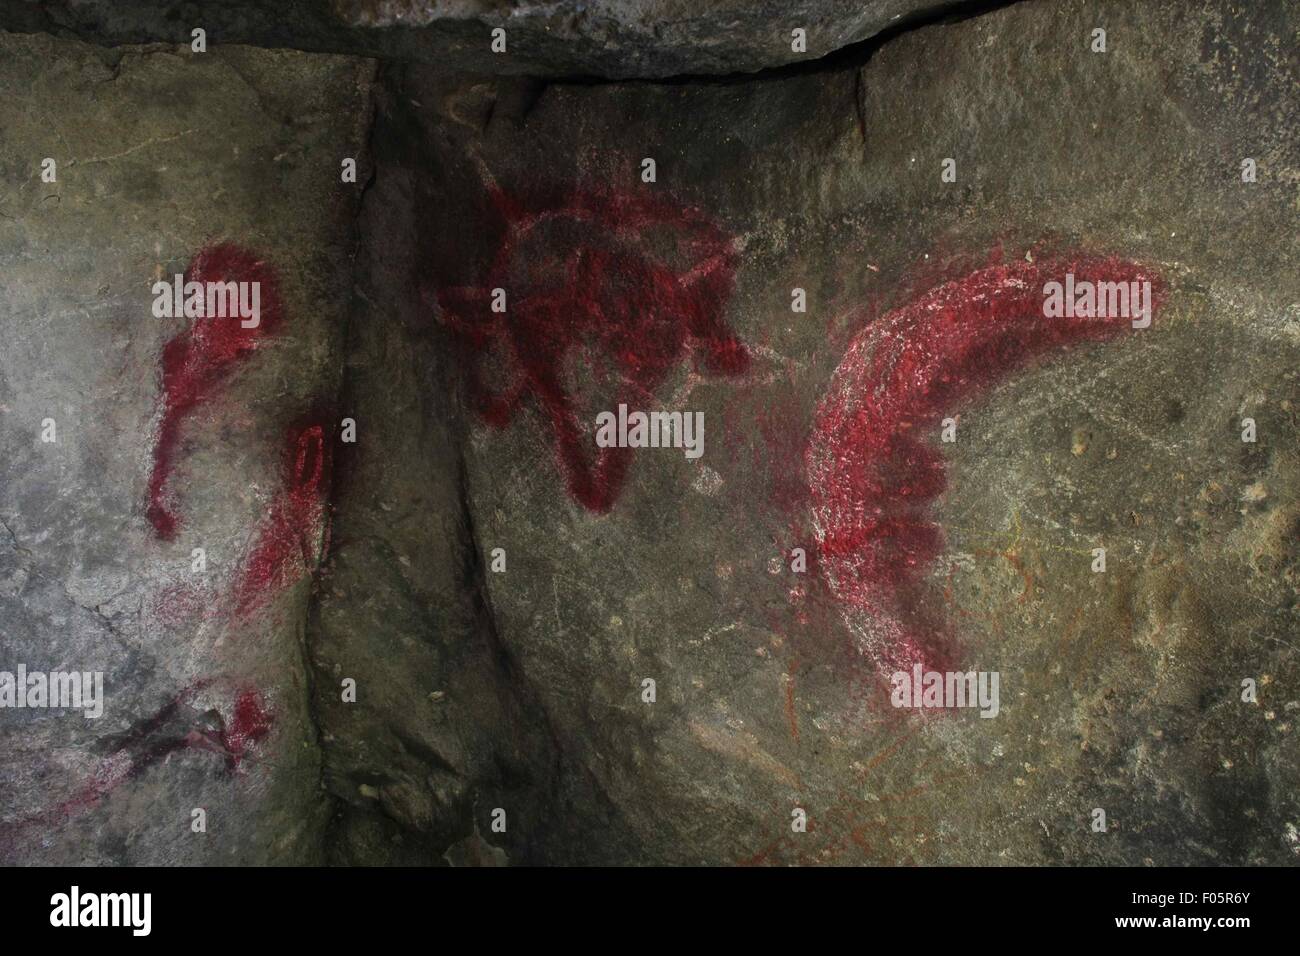 Tlaxcala, Mexico. 7th Aug, 2015. Cave paintings damaged with spray paint are seen in a cave in the Totolac municipality, Tlaxcala state, Mexico, on Aug. 7, 2015. According to local press, the cave paintings were damaged with spray paints in the ecotouristic area of Pena Pilares, which caused an irreversible damage. © NOTIMEX/Xinhua/Alamy Live News Stock Photo